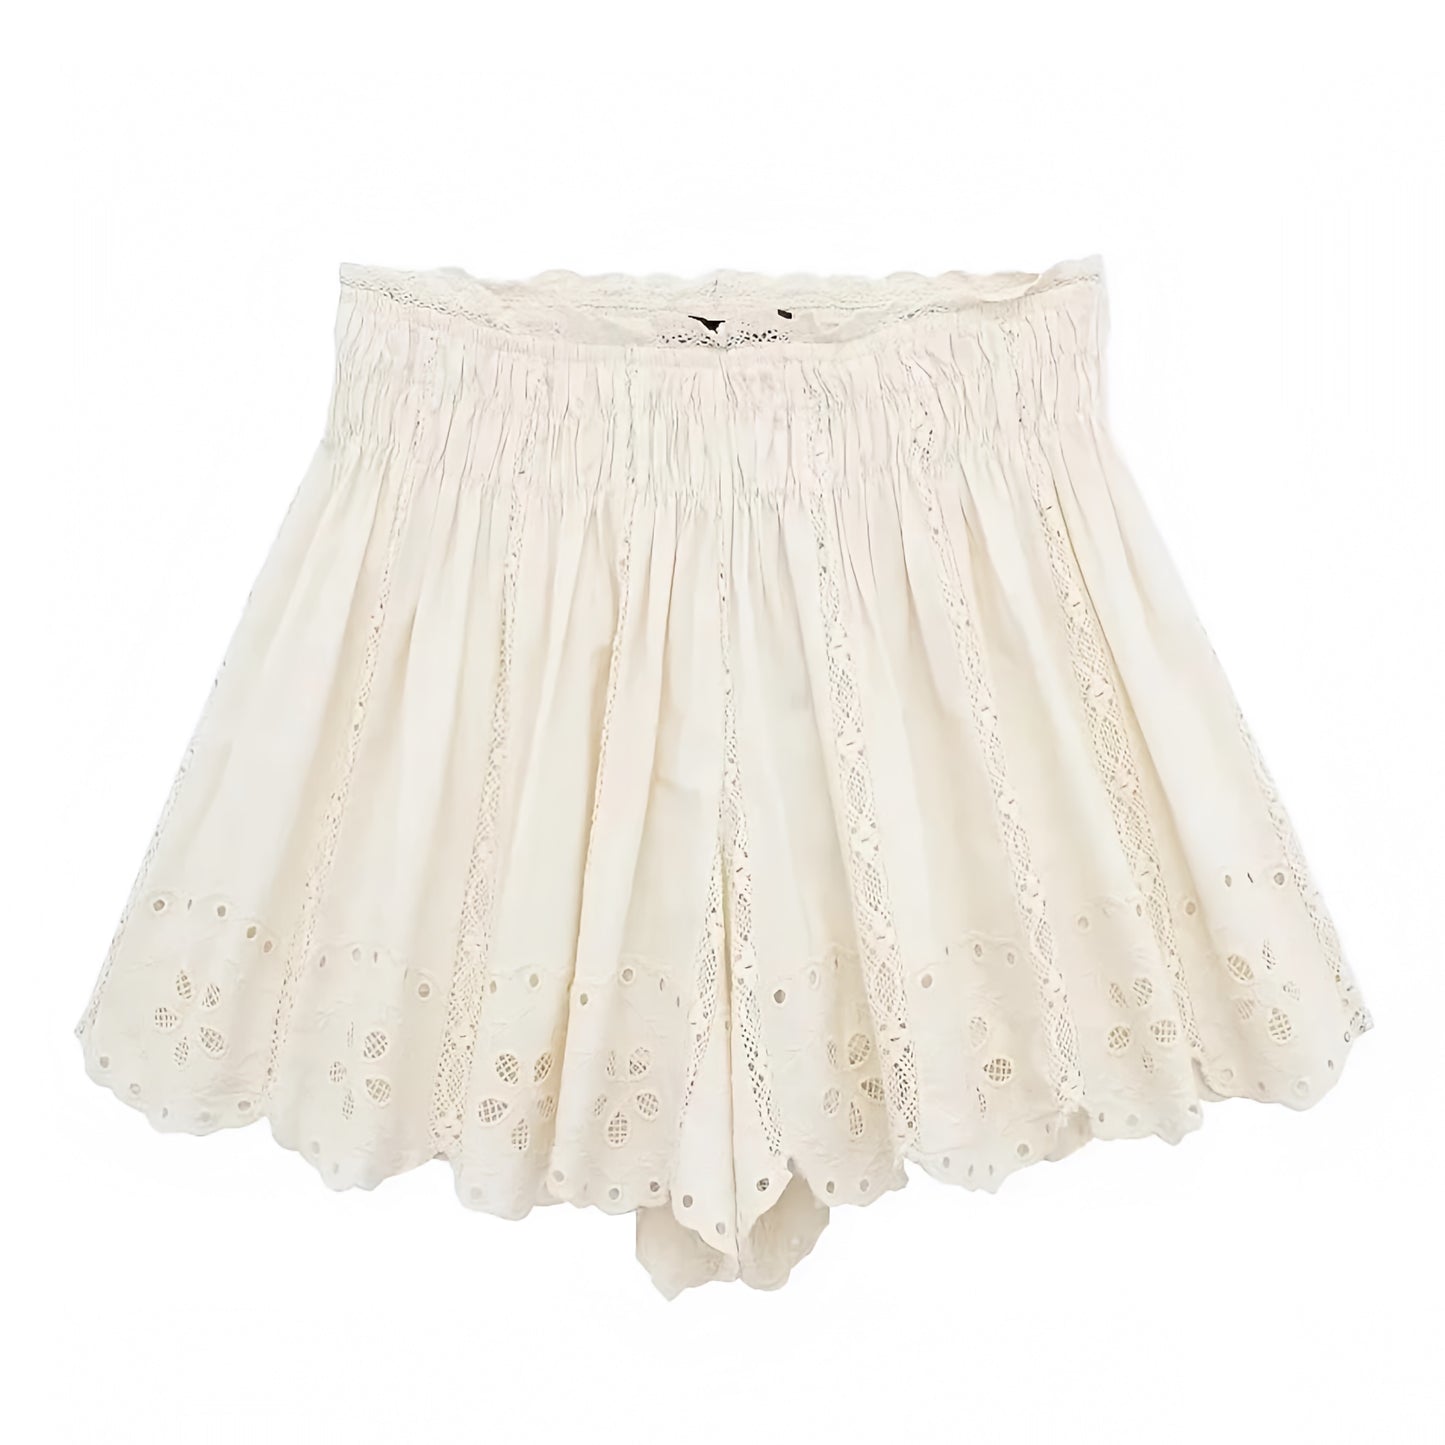 Light Beige Eyelet Embroidered Lace Trim Ruffled Mid-Rise Linen Shorts